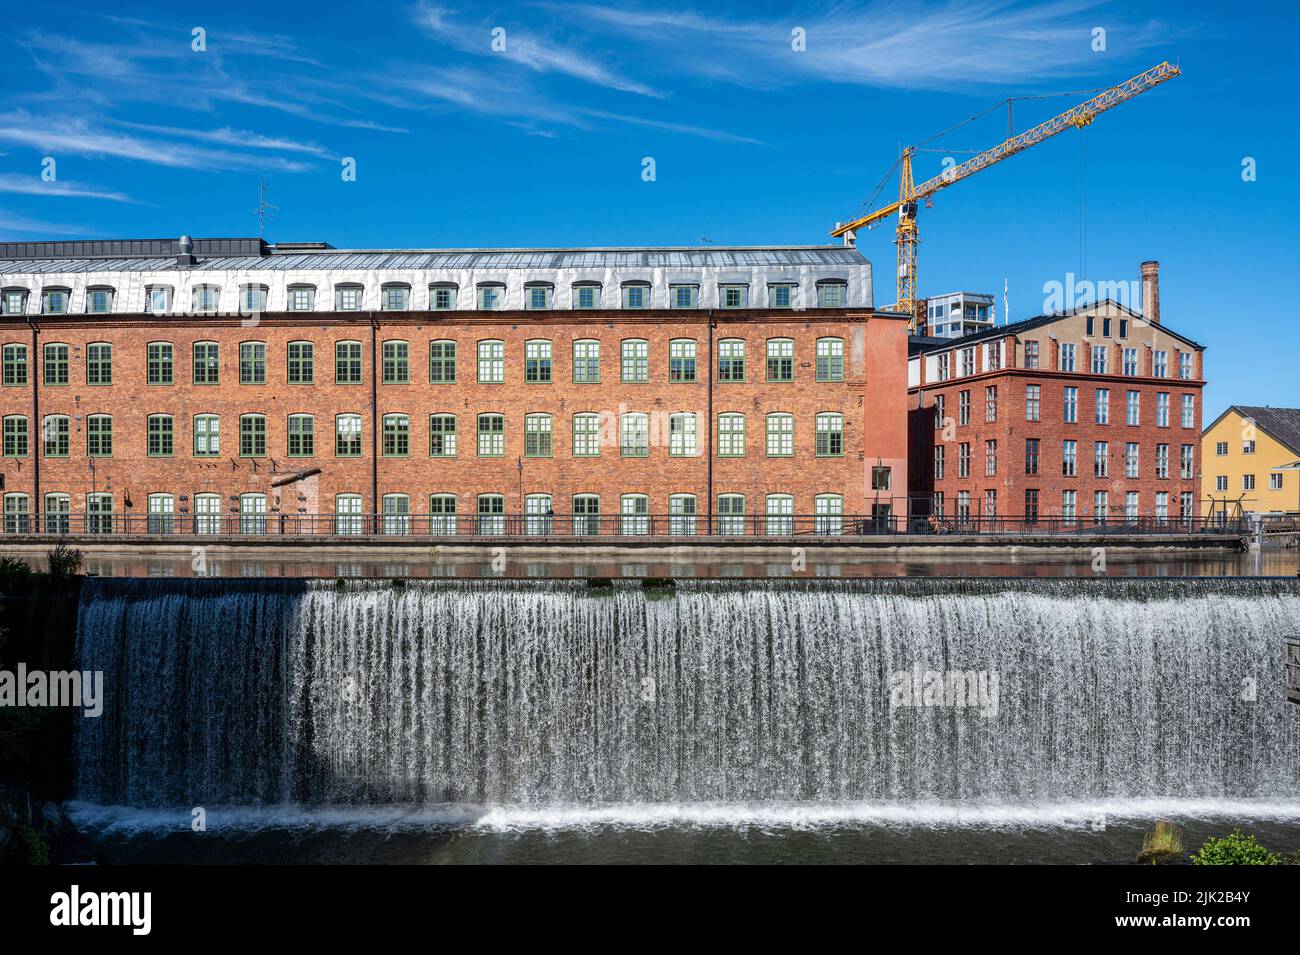 The old industrial landscape and Motala river in Norrkoping. Norrkoping is a historic industrial town in Sweden. Stock Photo